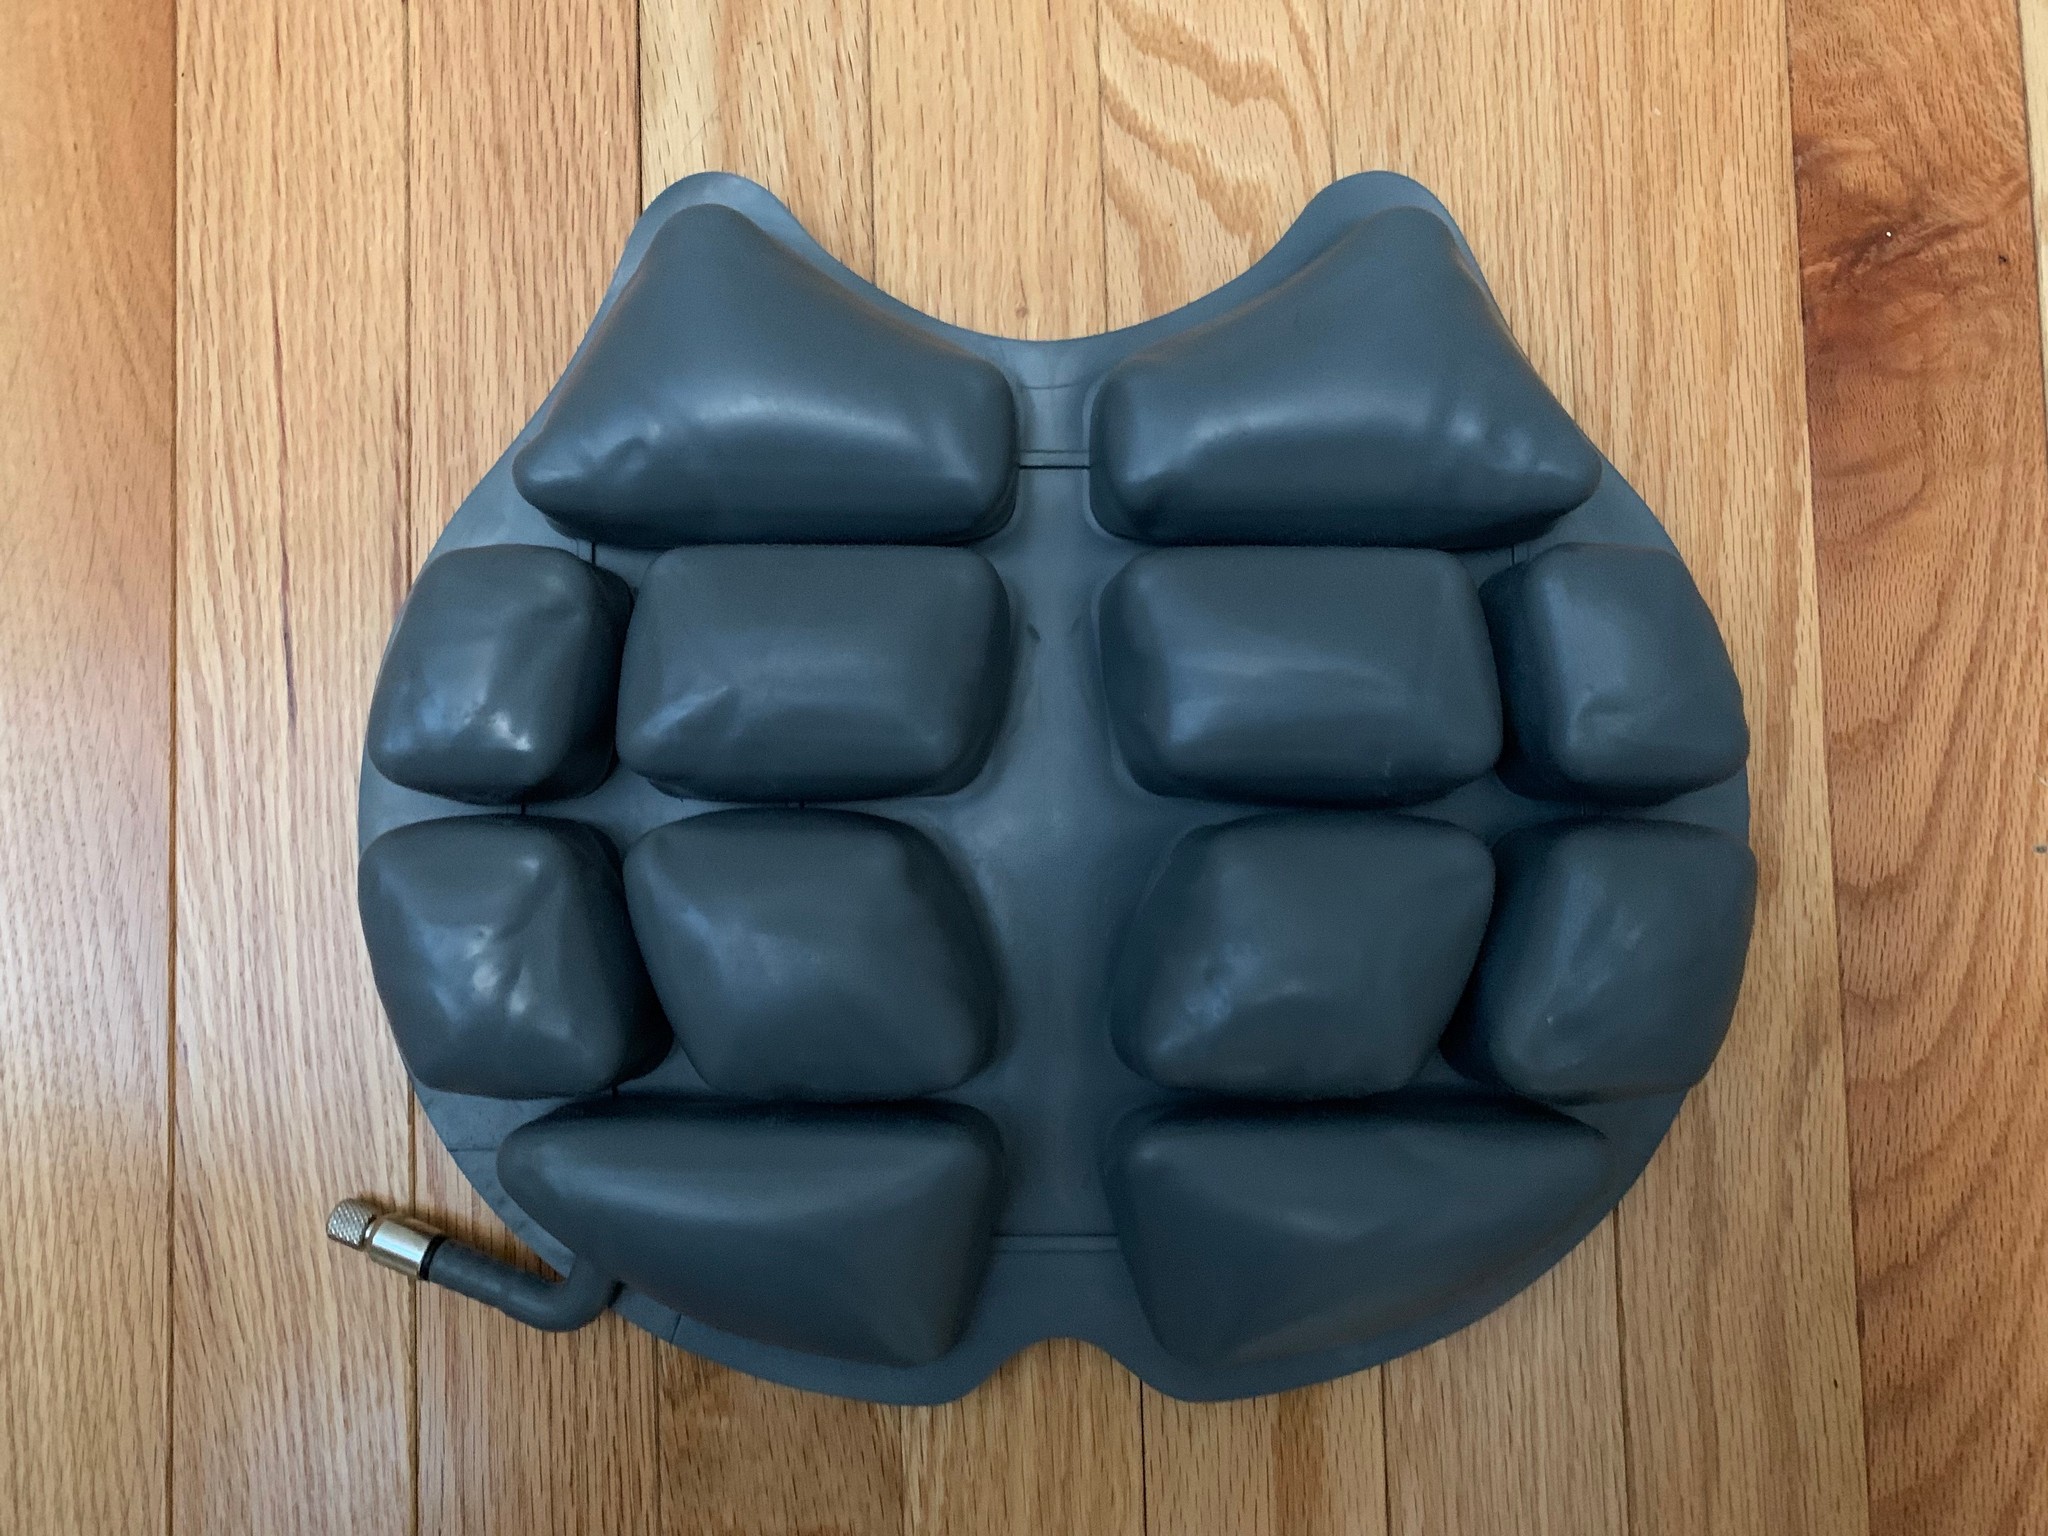 Motorcycle Seat Cushions Motorcycle Saddle Air Cushion Inflatable